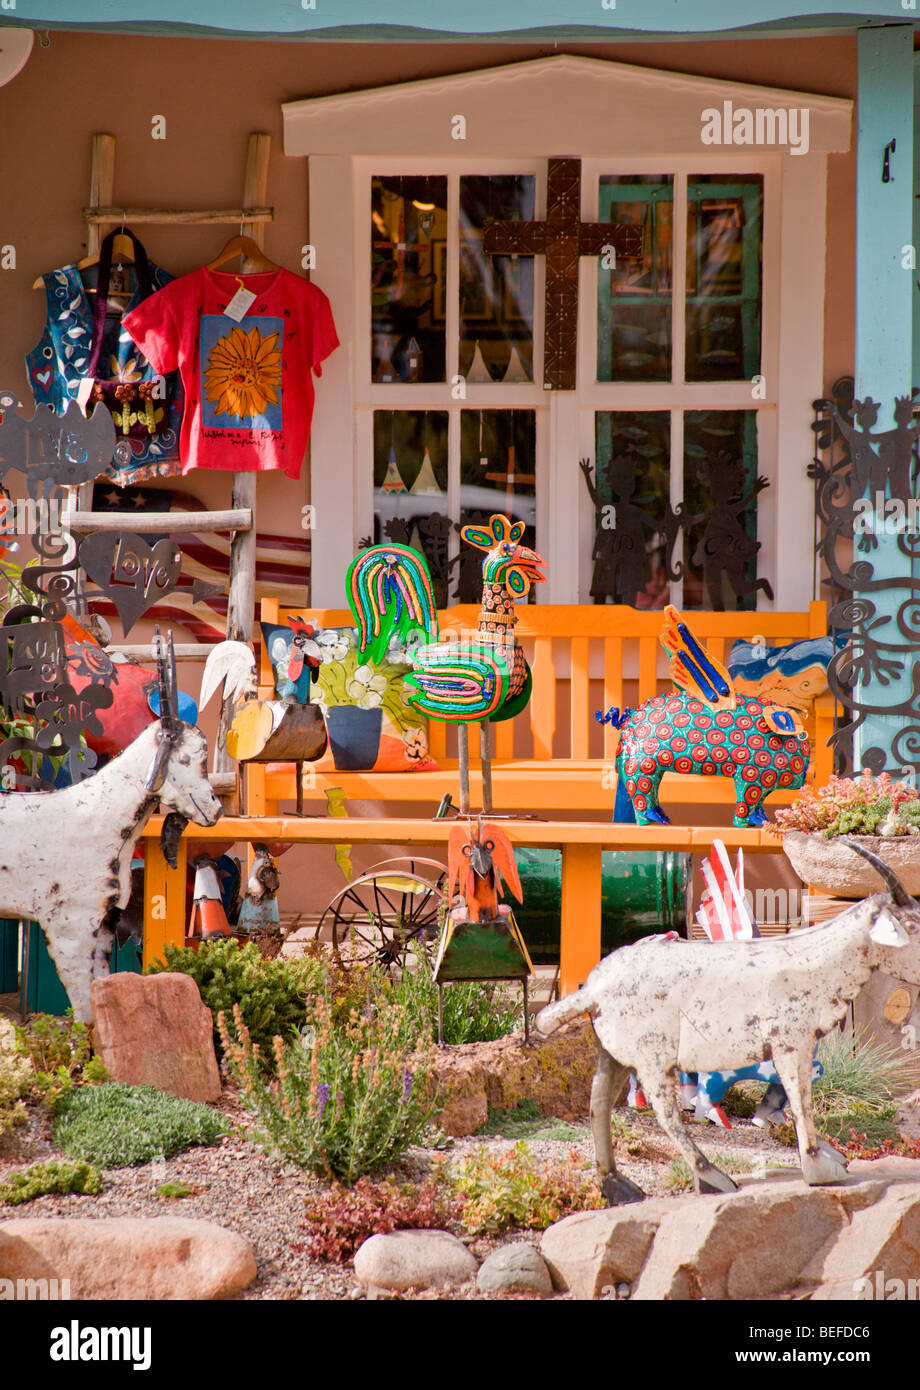 A whimsical sculpture garden stands in front of an art gallery, in the arts and crafts town of Arroyo Seco, New Mexico. Stock Photo